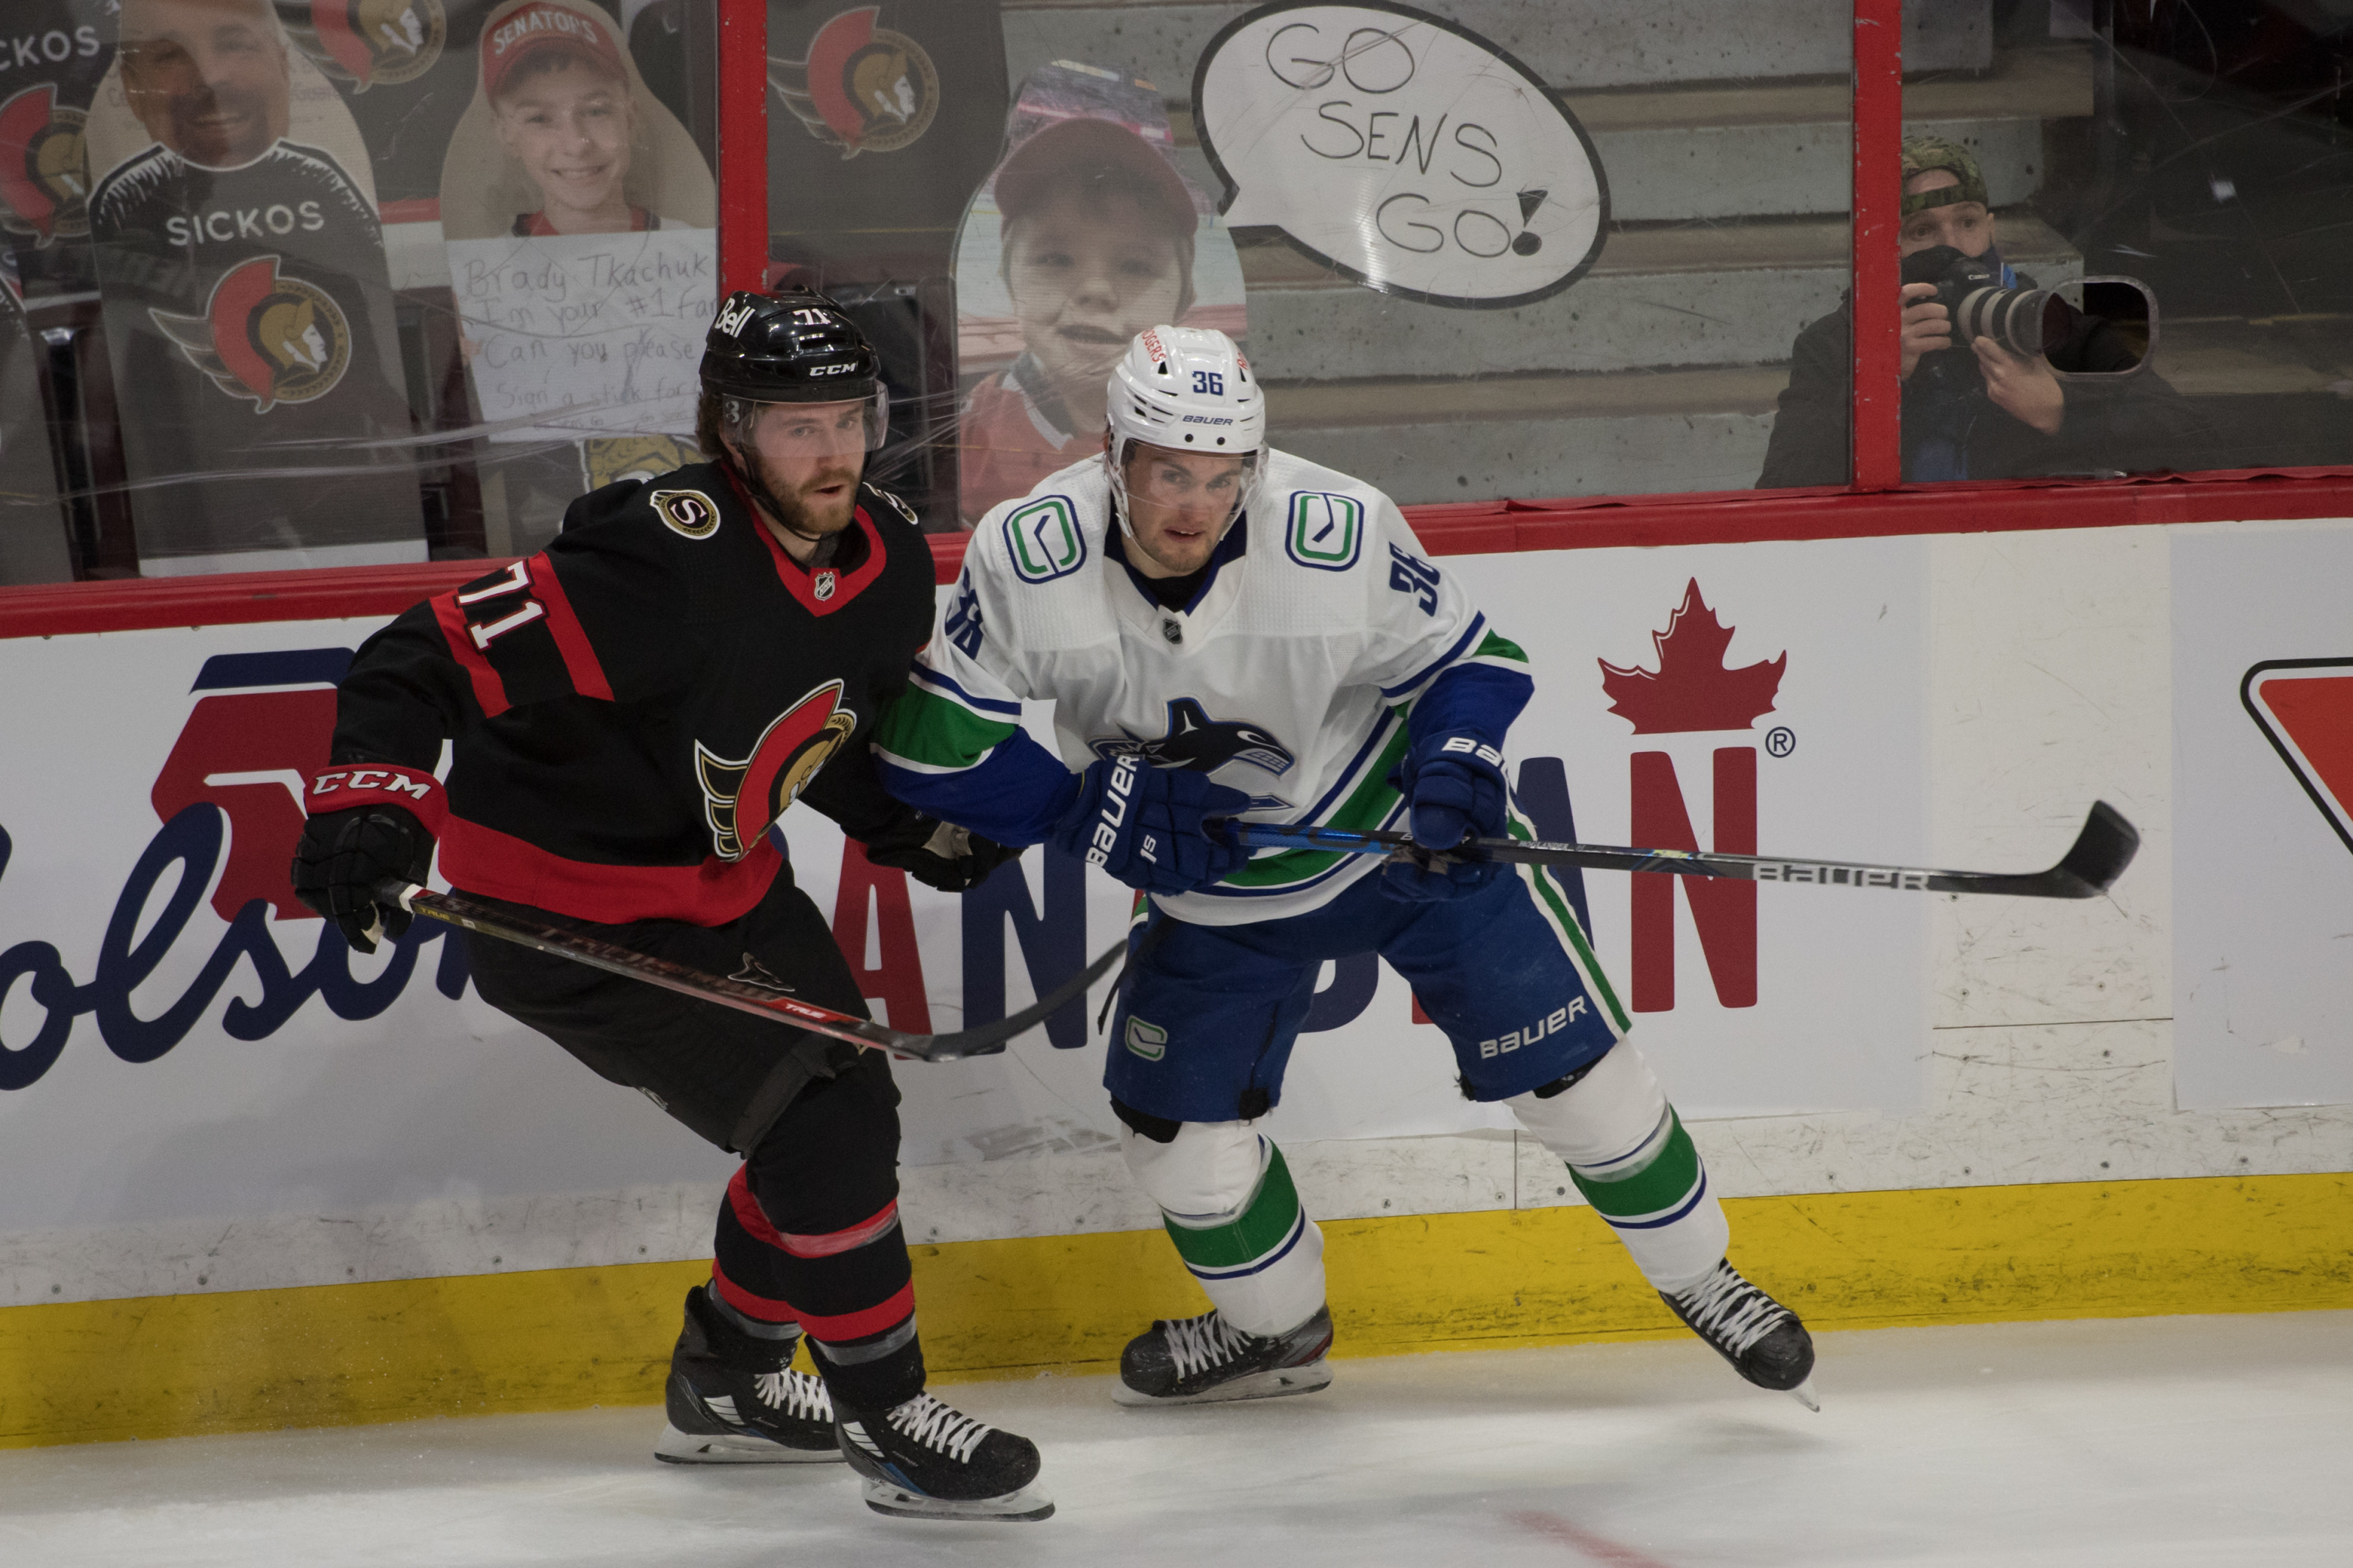 The Skate: The Canucks are a tire fire right now